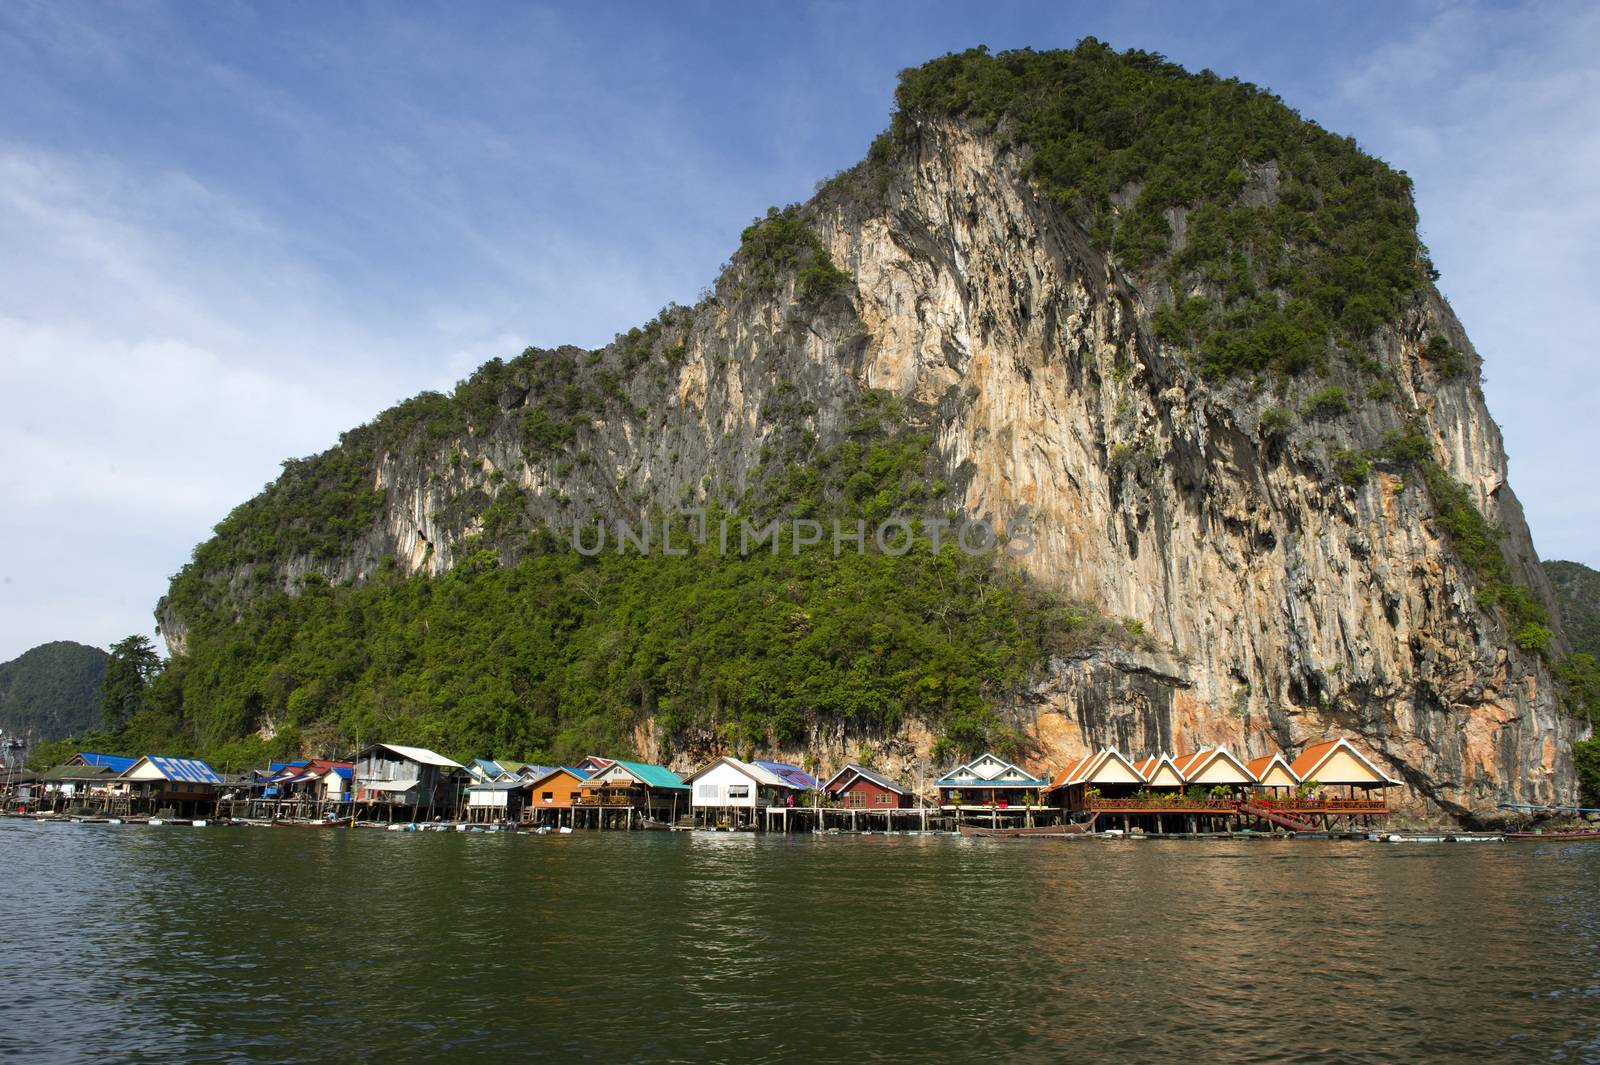 Panyee Island in Phang Nga Province, Thailand by think4photop